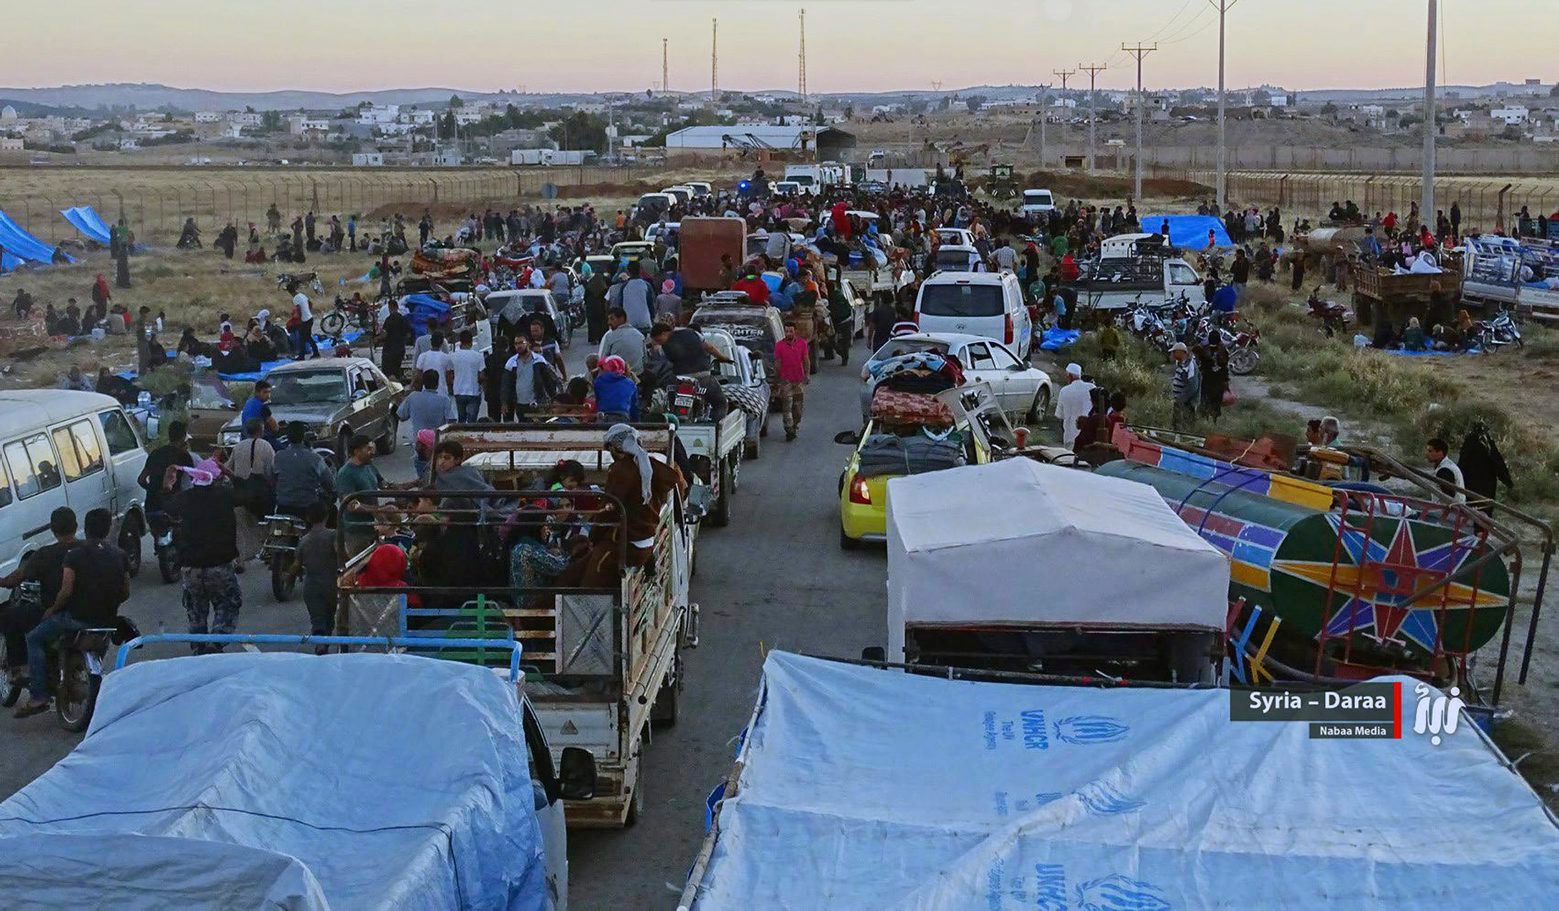 This Saturday, June 30, 2018, photo provided by Nabaa Media, a Syrian opposition media outlet, shows people in their vehicles who fled from Daraa, gathering near the Syria-Jordan border. Jordan's foreign minister said on Monday that he will hold talks with his Russian counterpart over the conflict in Syria, where the latest government offensive in the country's south has displaced 270,000 people, according to a U.N. officials. (Nabaa Media, via AP) Syria